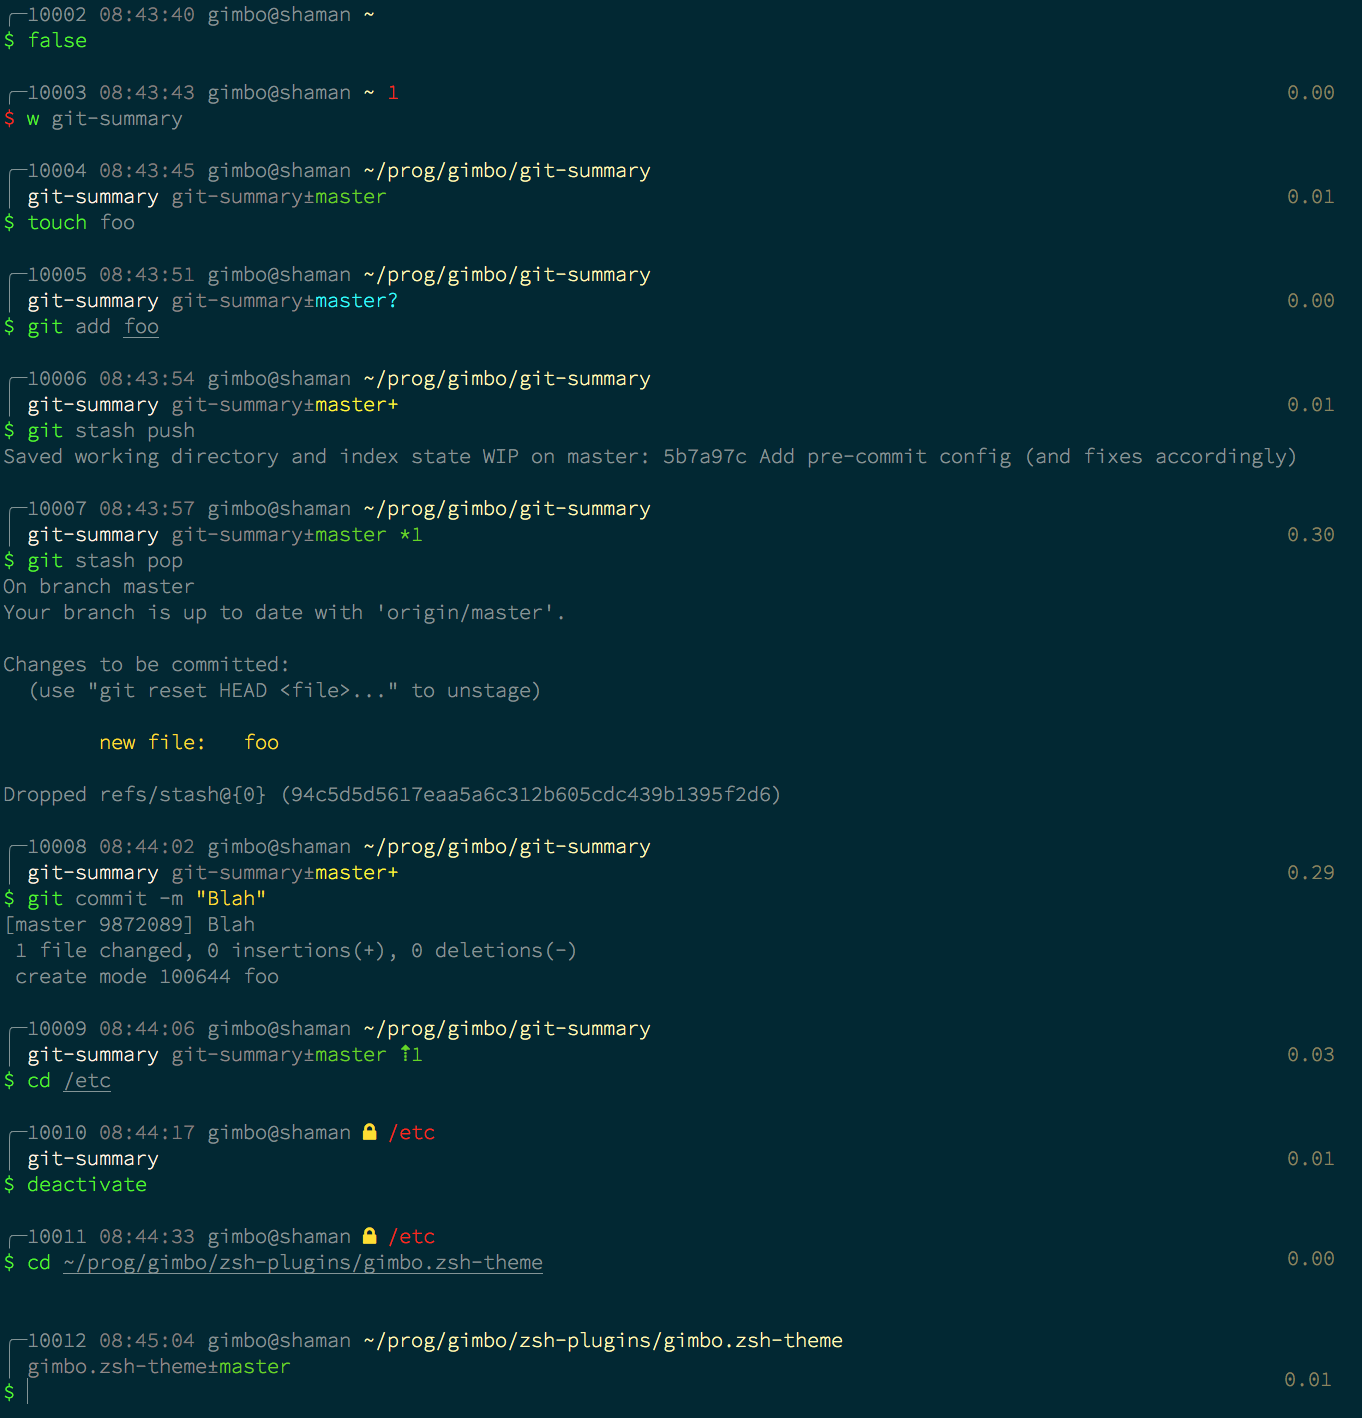 gimbo - A variant of purepower with more features, a little eye candy and context-sensitive extra lines. Includes git status decorations, history number, username/hostname context, directory status, status of last command if it failed, and the Python virtualenv name if present.